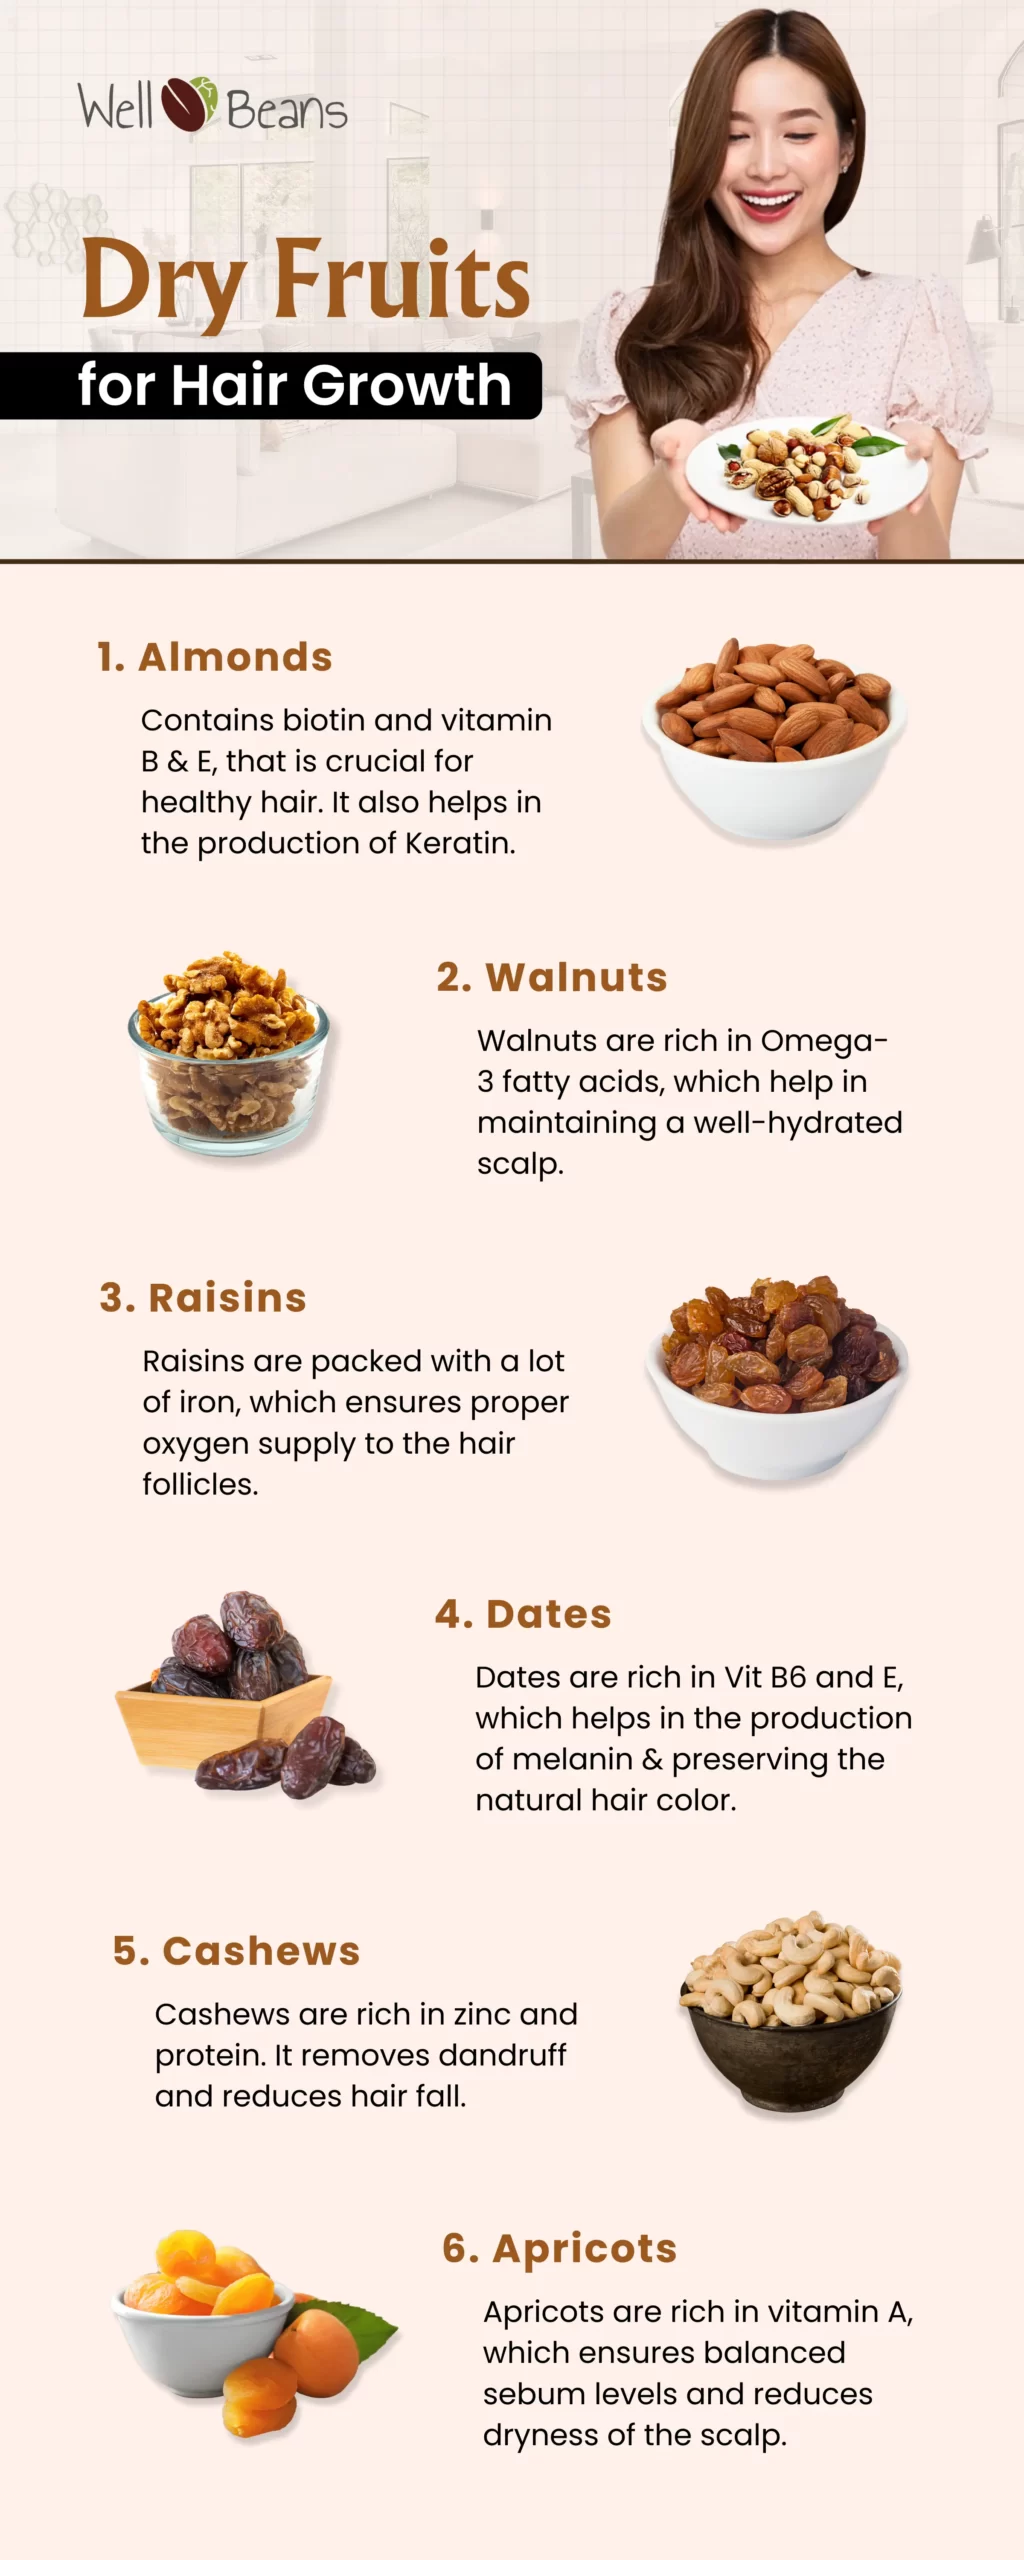 Dry fruits for hair growth infographic